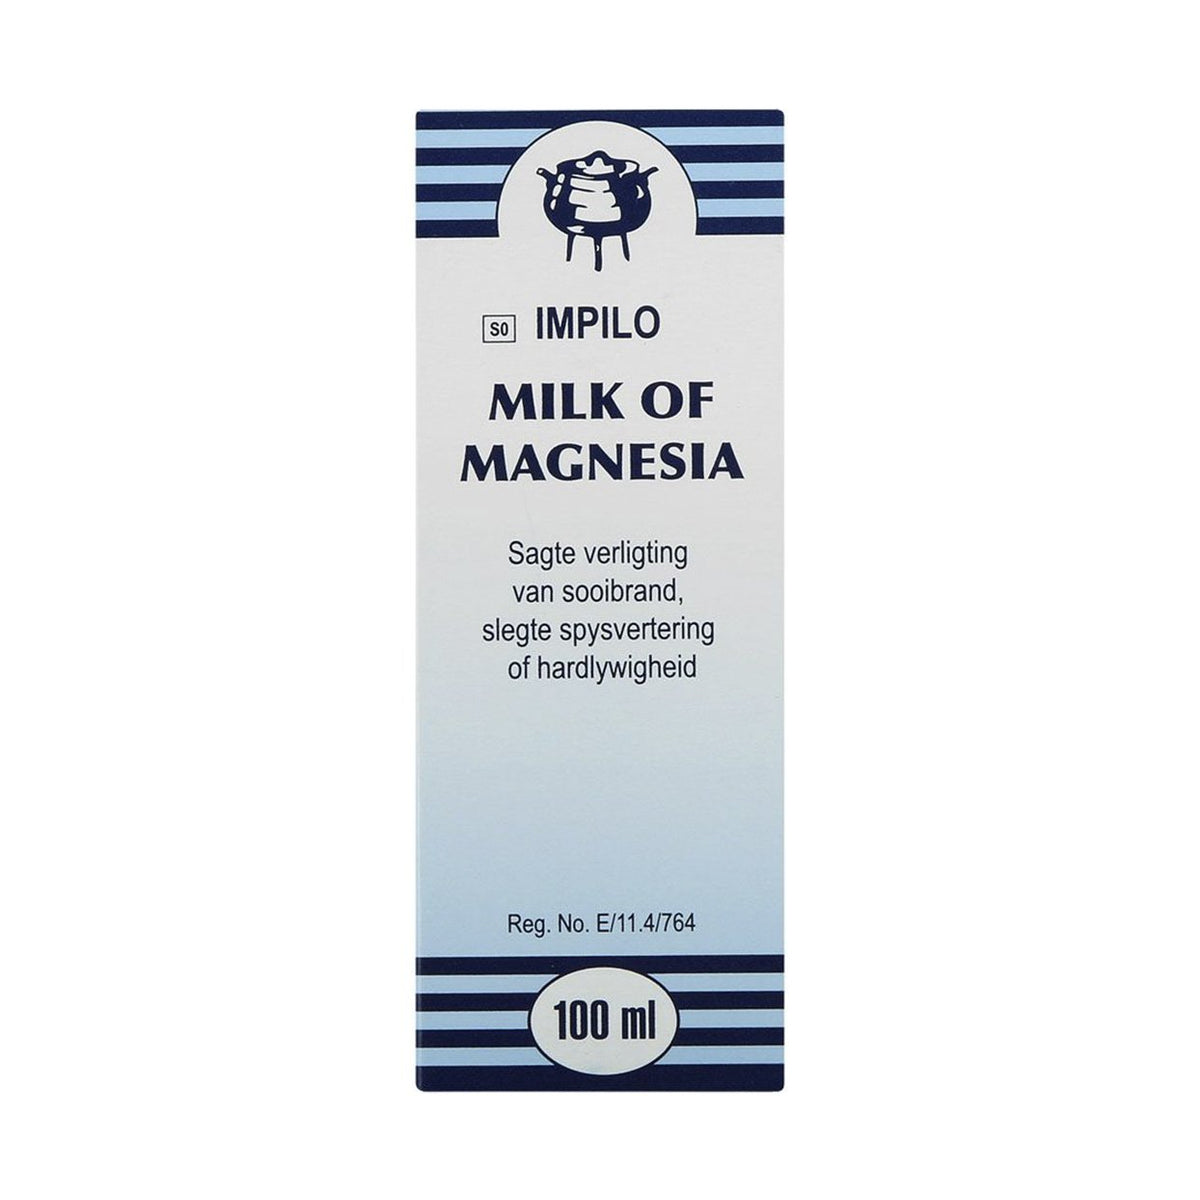 Impilo Milk of Magnesia 100ml - An antacid and laxative - Avid Brands